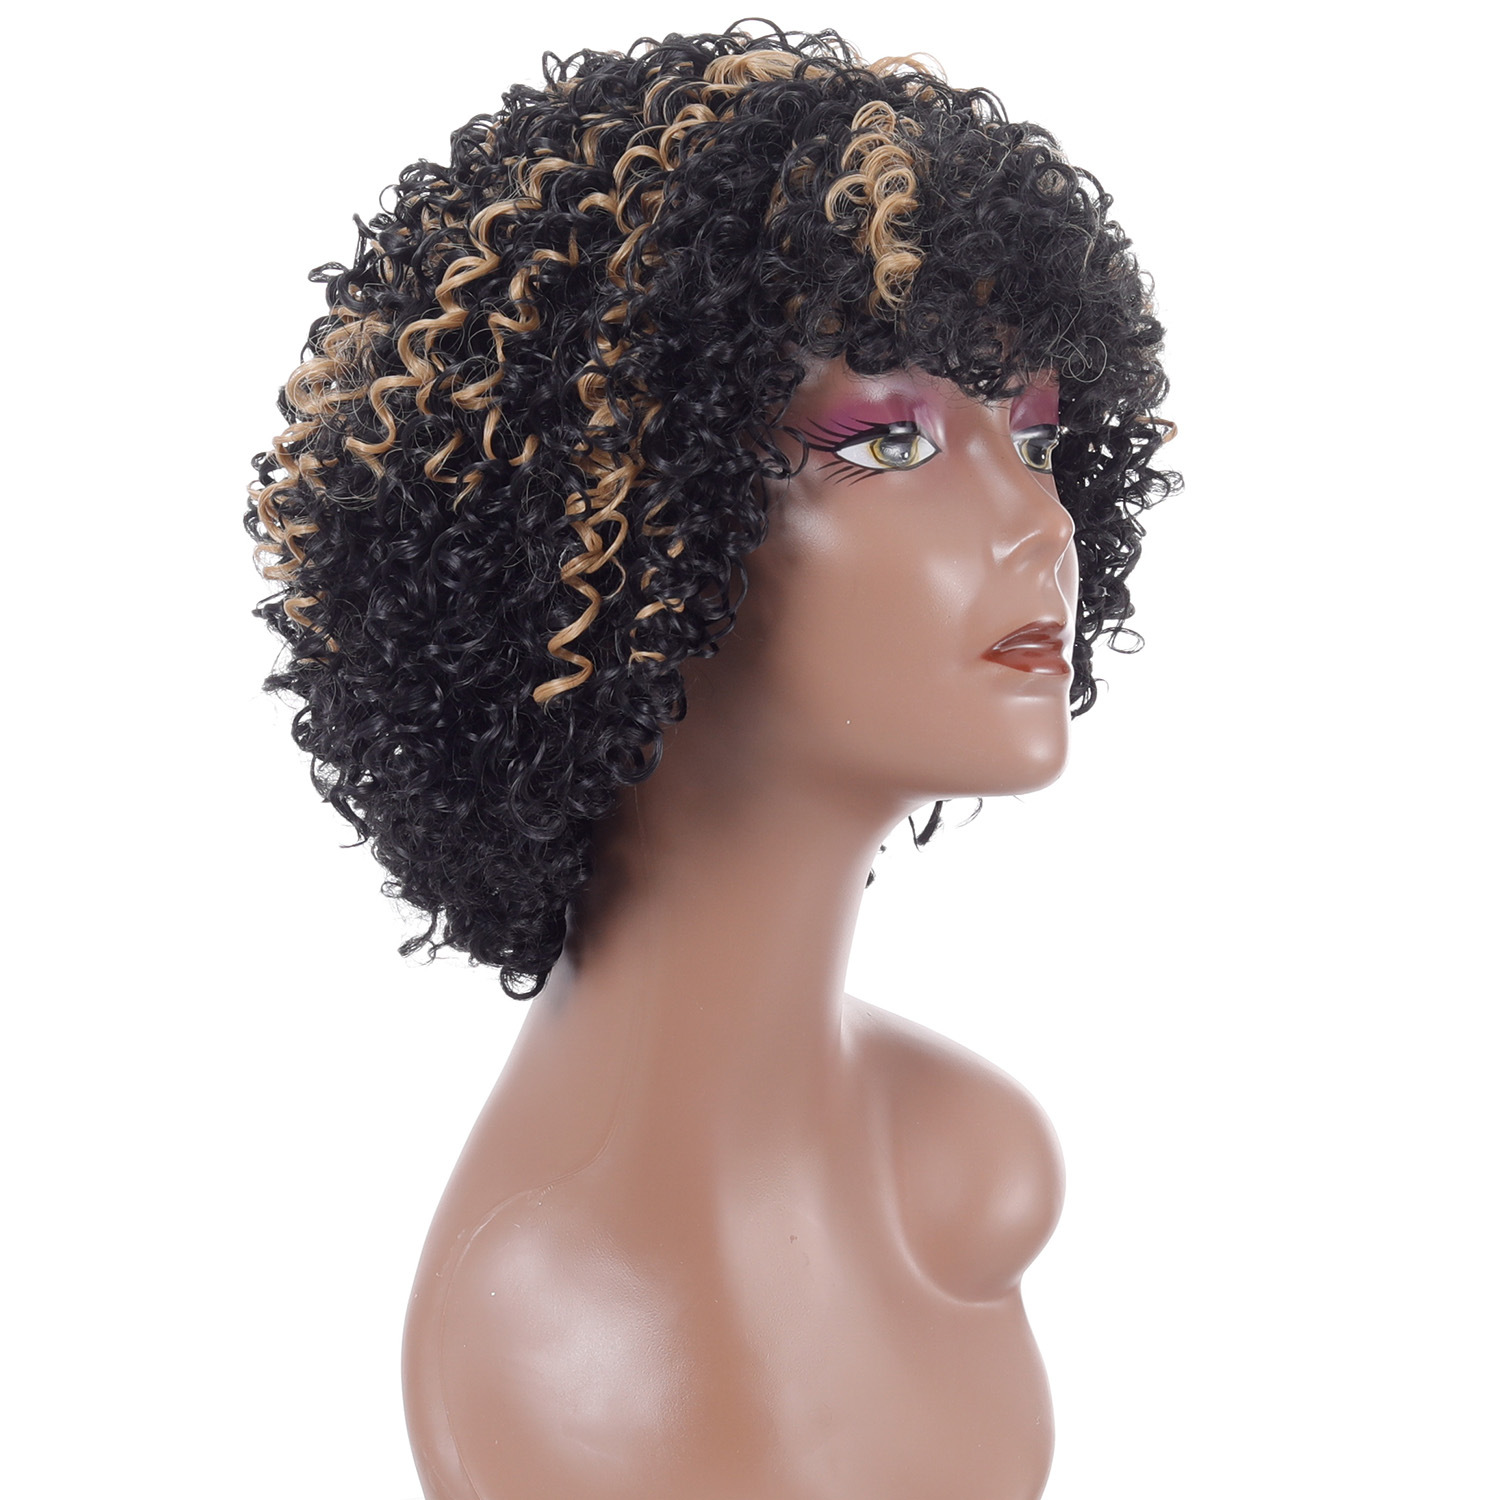 Headgear featuring afro small curly wig design for women, part of a black highlight blonde short curly hair wig